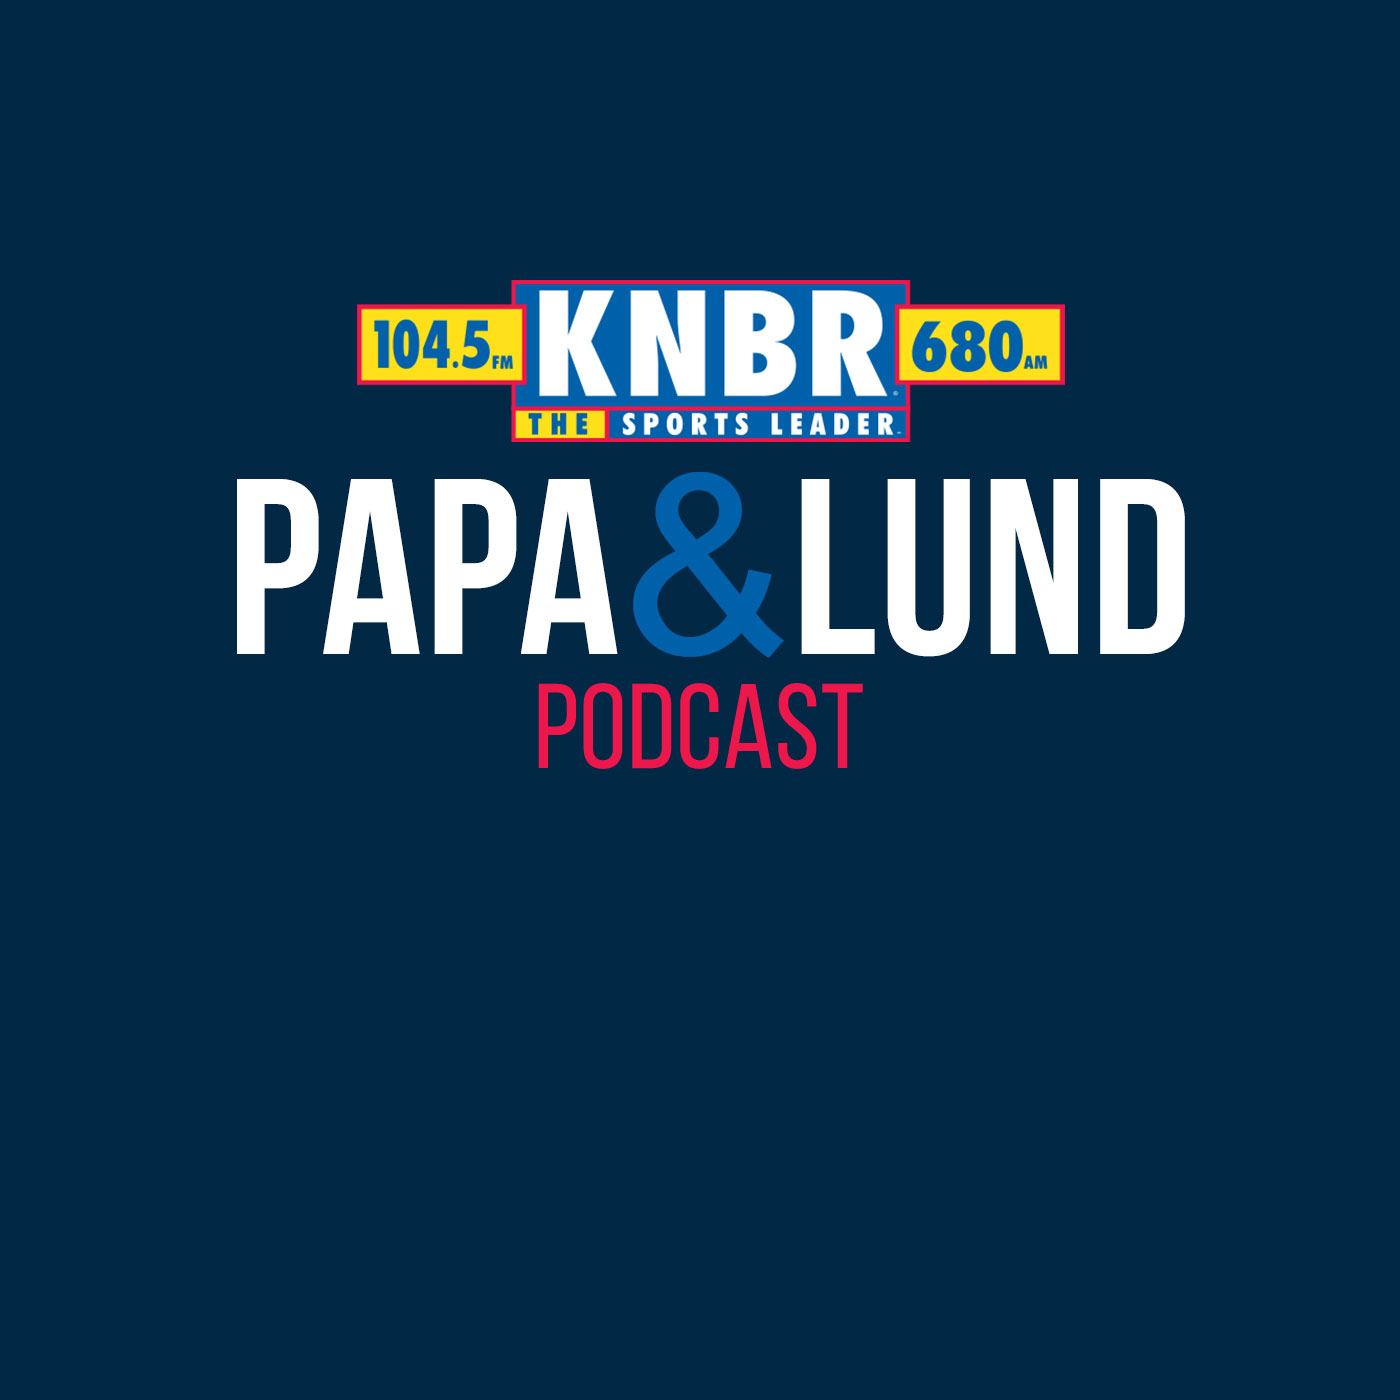 8-1 Rick Welts joins Papa & Lund to pay tribute to the Great Bill Russell and shares some behind the scenes moments with the greatest winner on and off the court